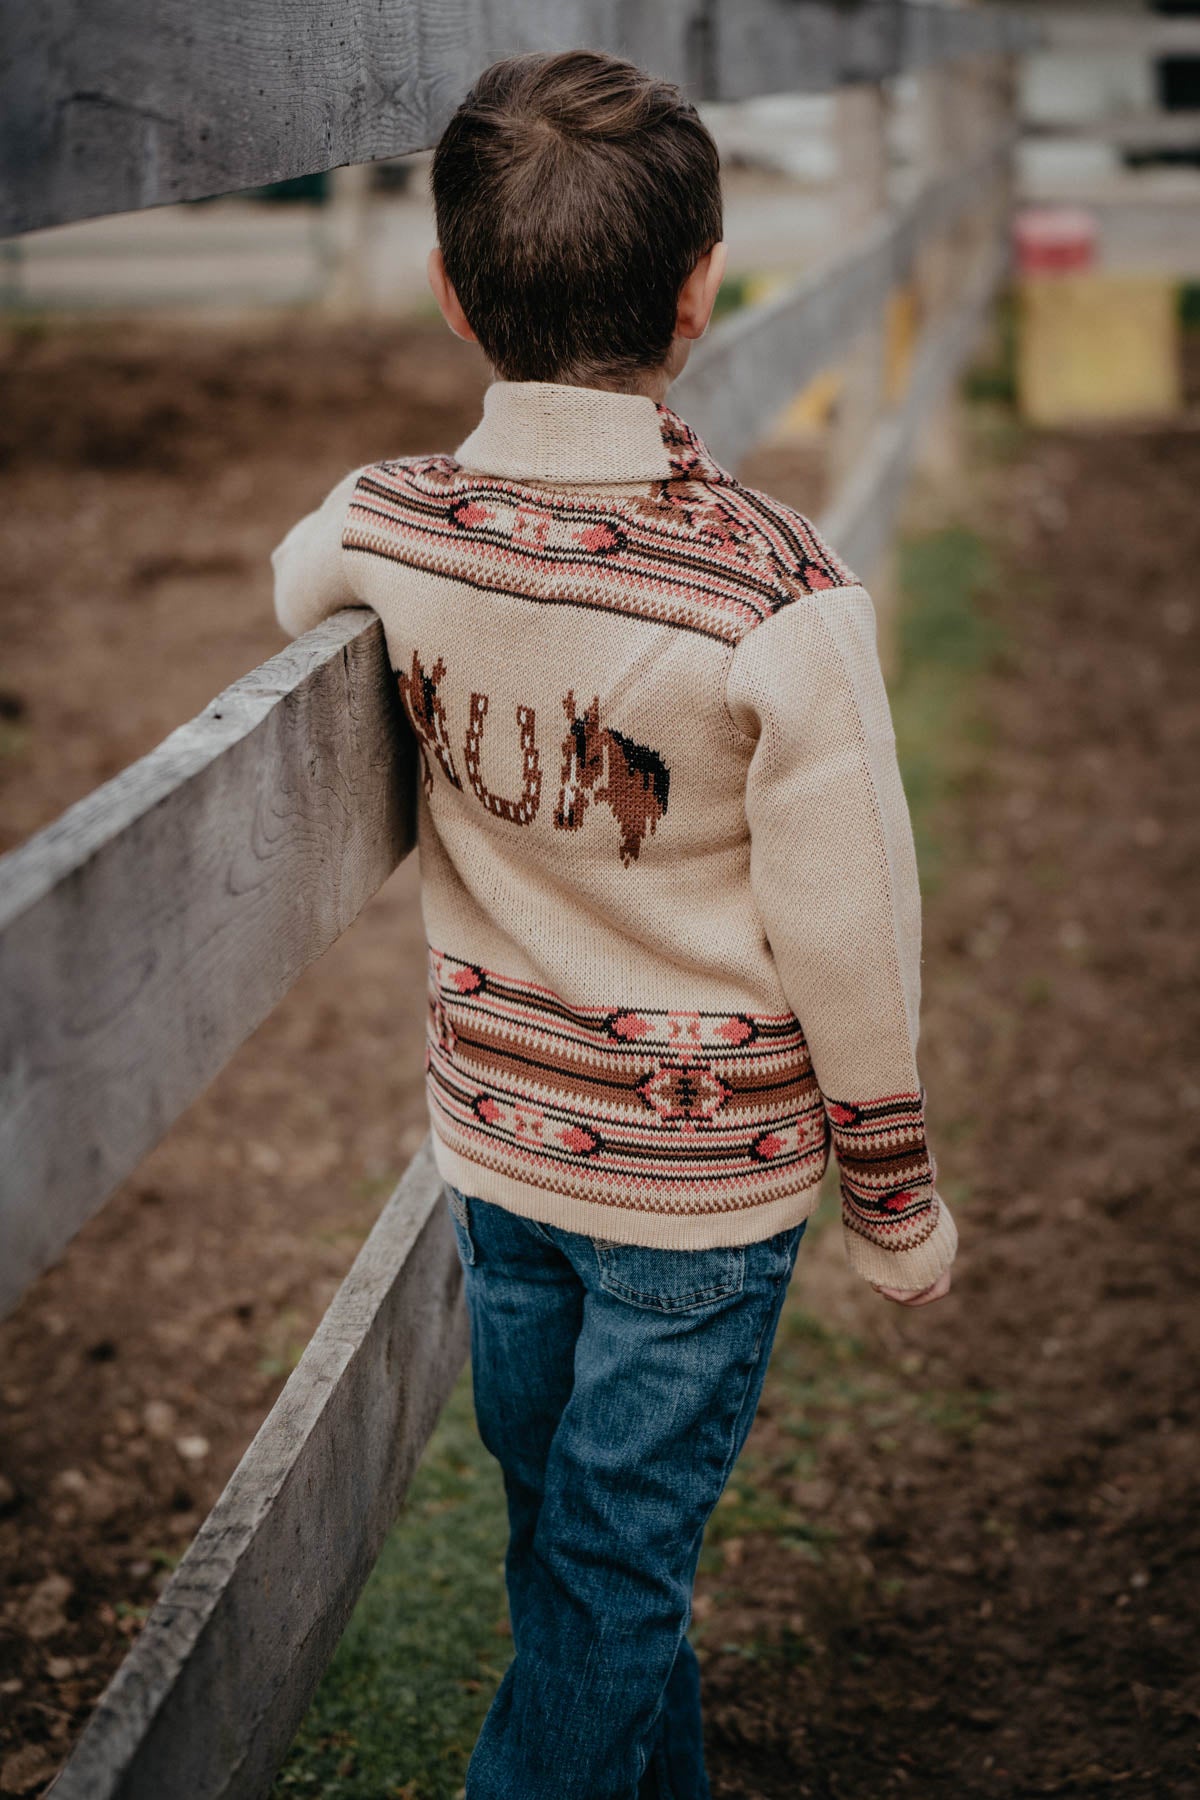 'Everest' Youth Vintage Inspired Horse Cardigan (Youth Sizes 4T - 12)